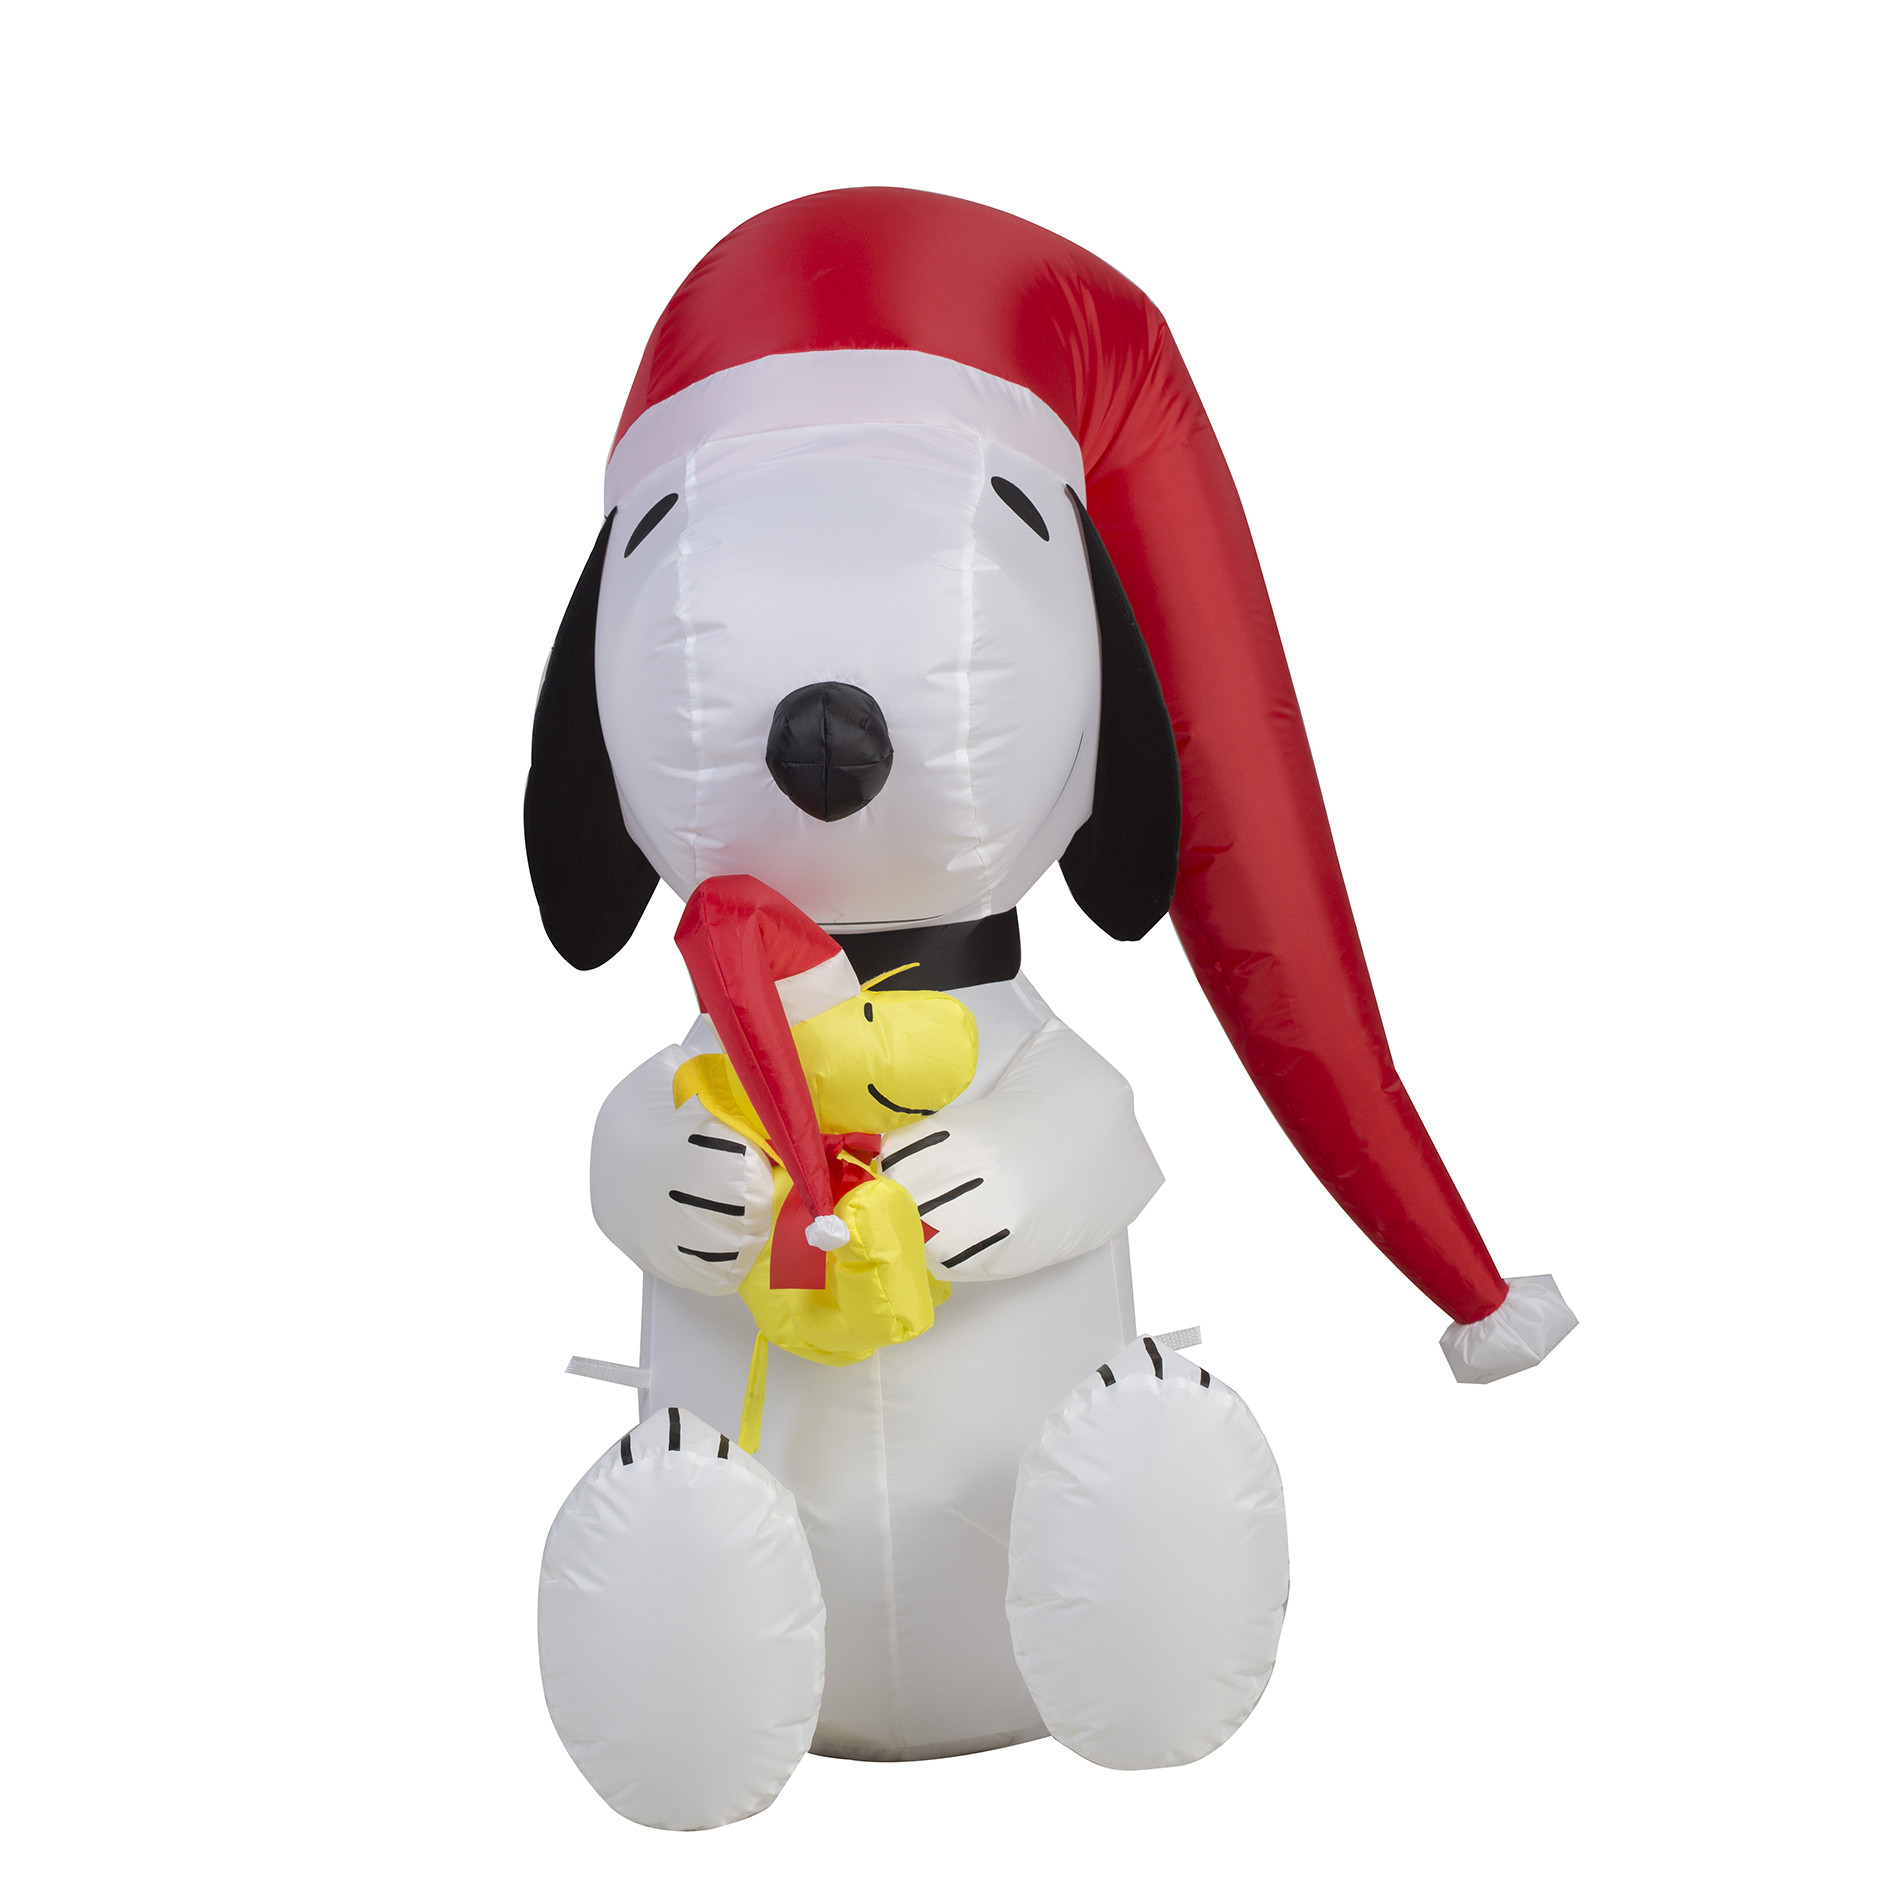 Peanut Outdoor Christmas Decorations
 Peanuts By Schulz 4 Airblown Snoopy Christmas Decoration